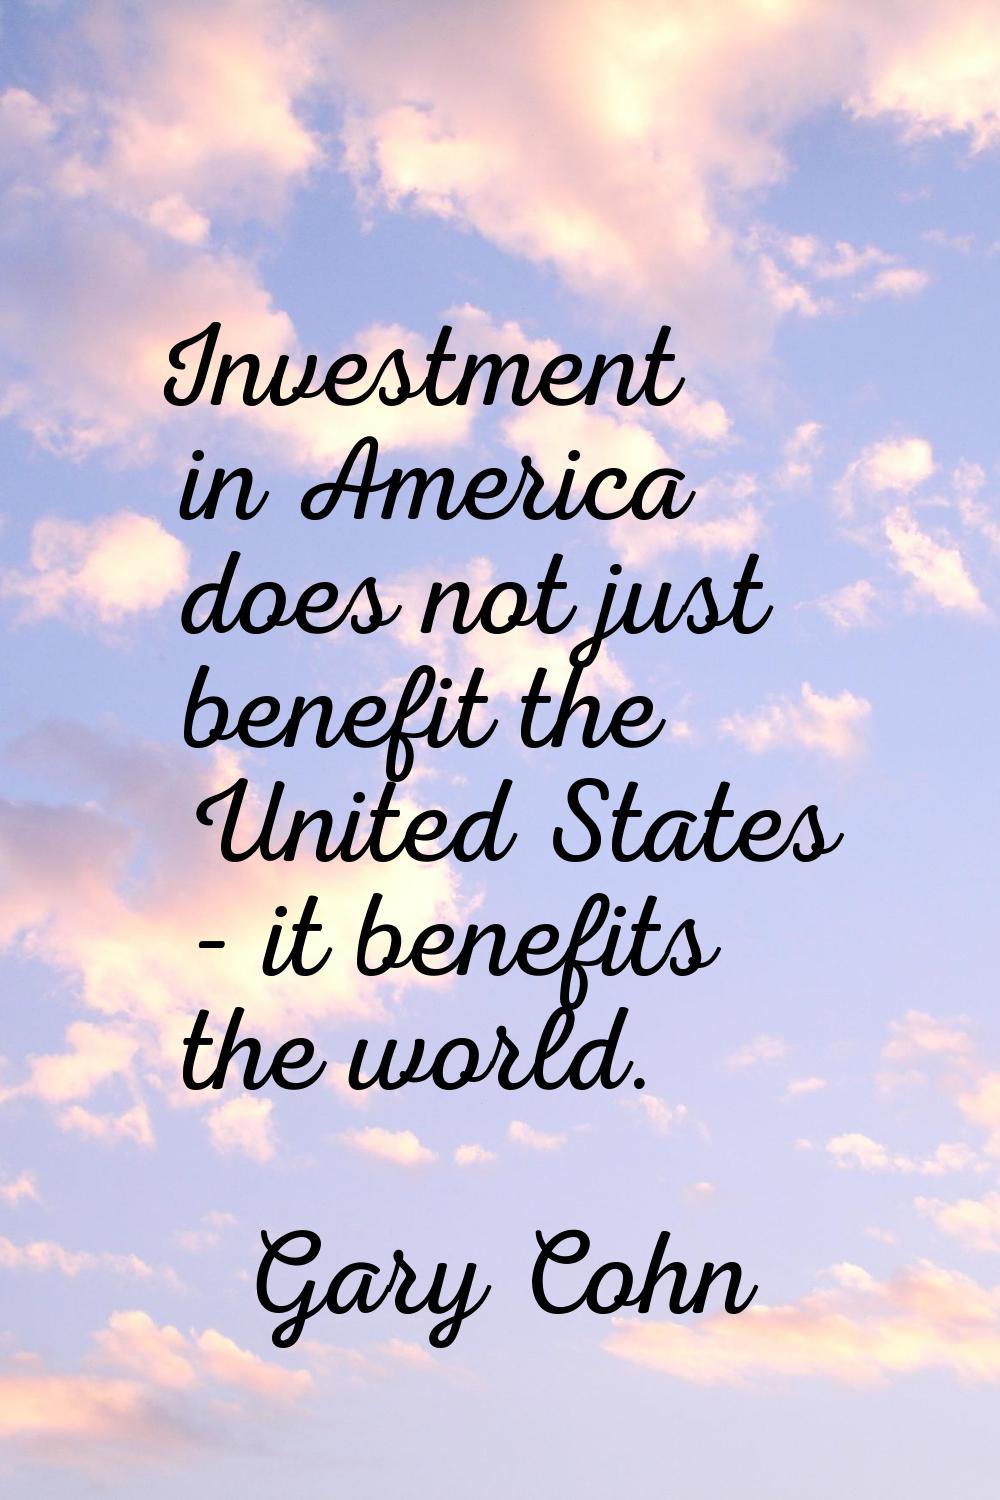 Investment in America does not just benefit the United States - it benefits the world.